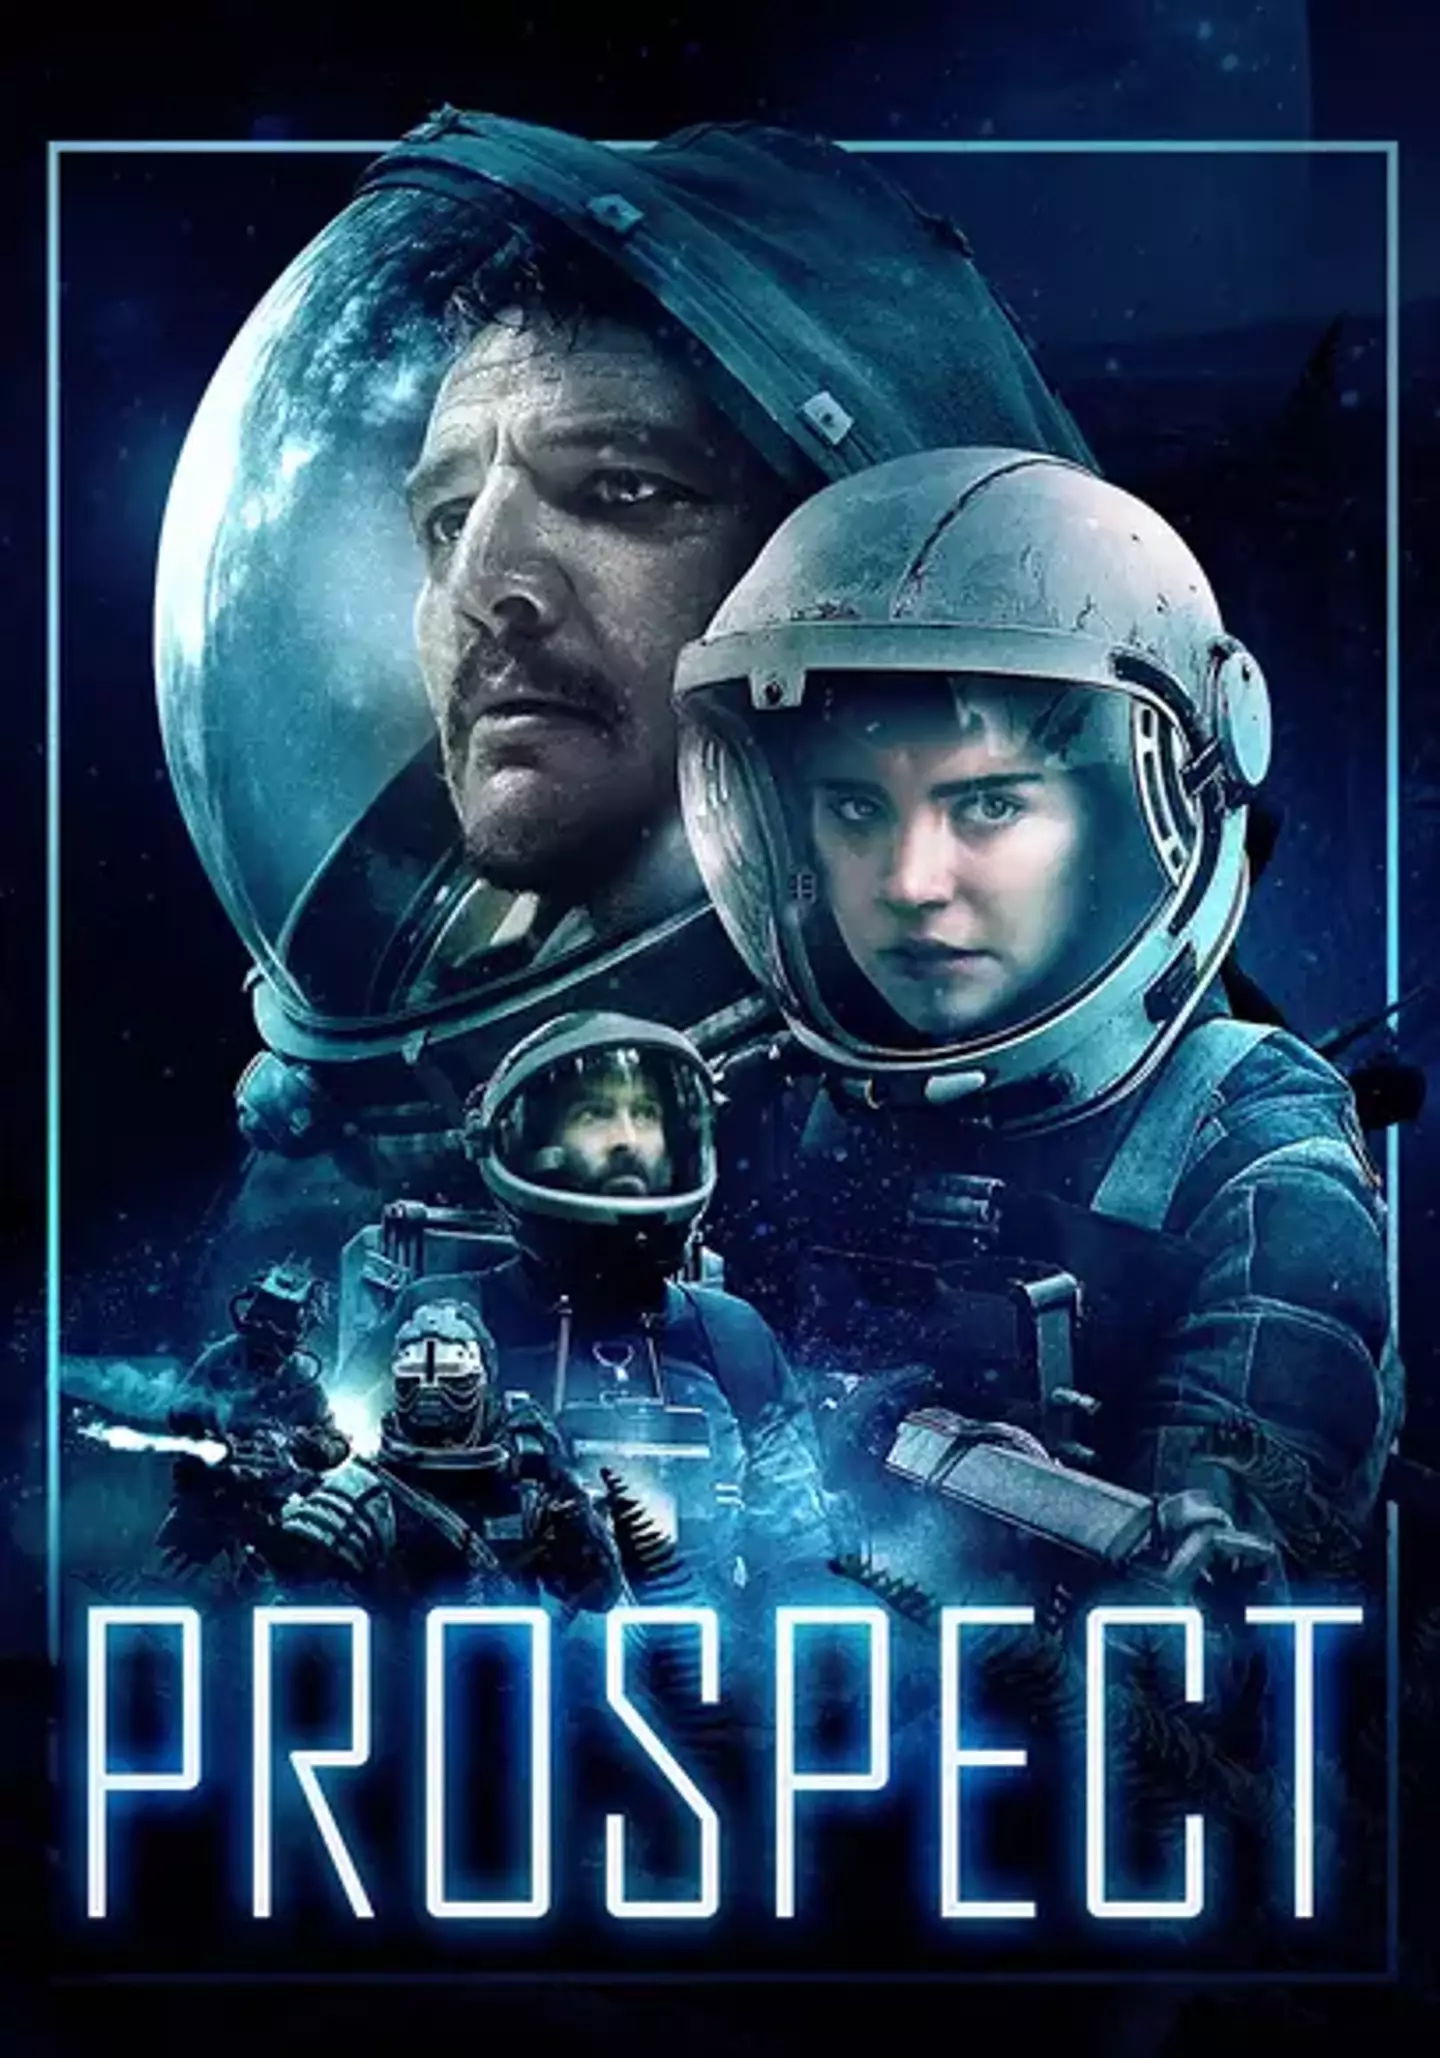 One of the top rated films on Tubi is Prospect (Tubi)